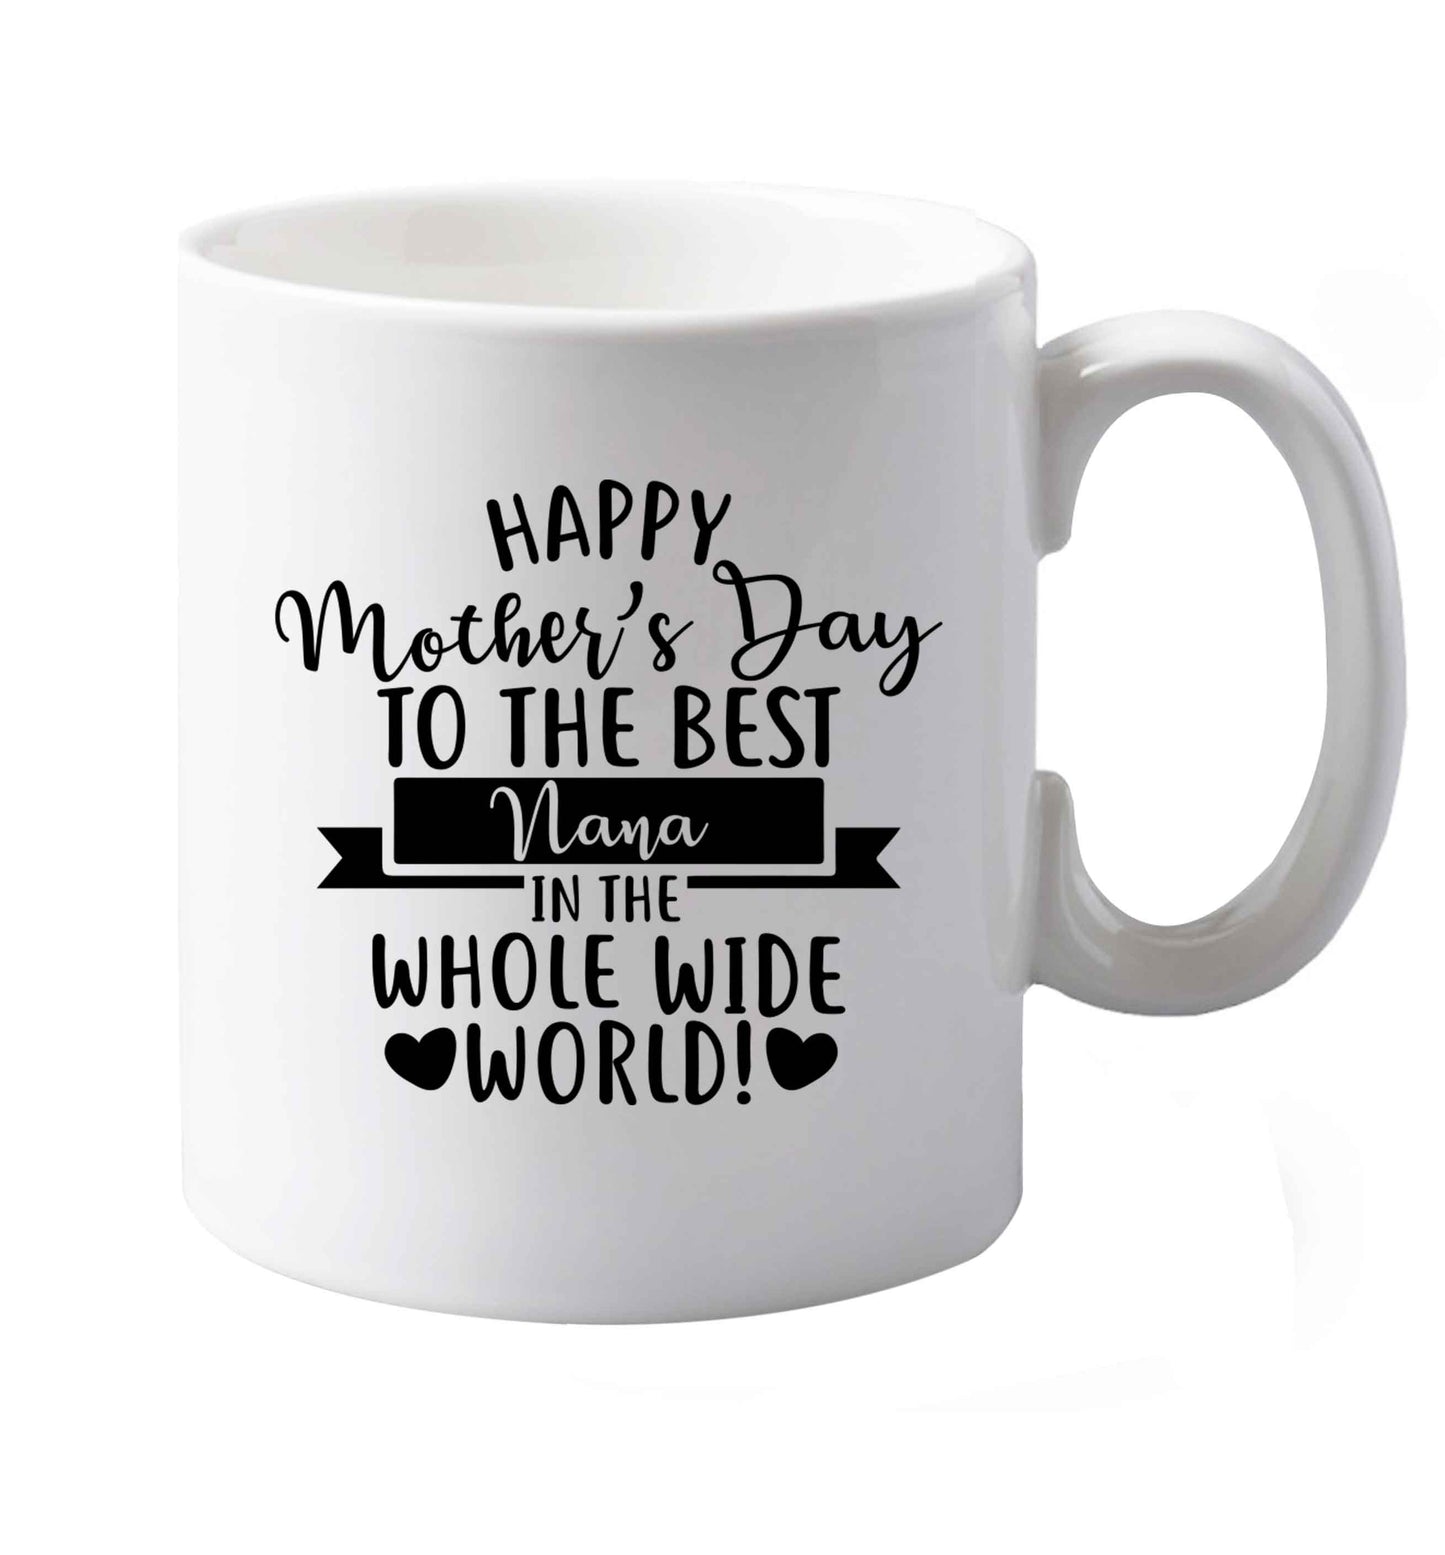 10 oz Happy mother's day to the best nana in the world ceramic mug both sides